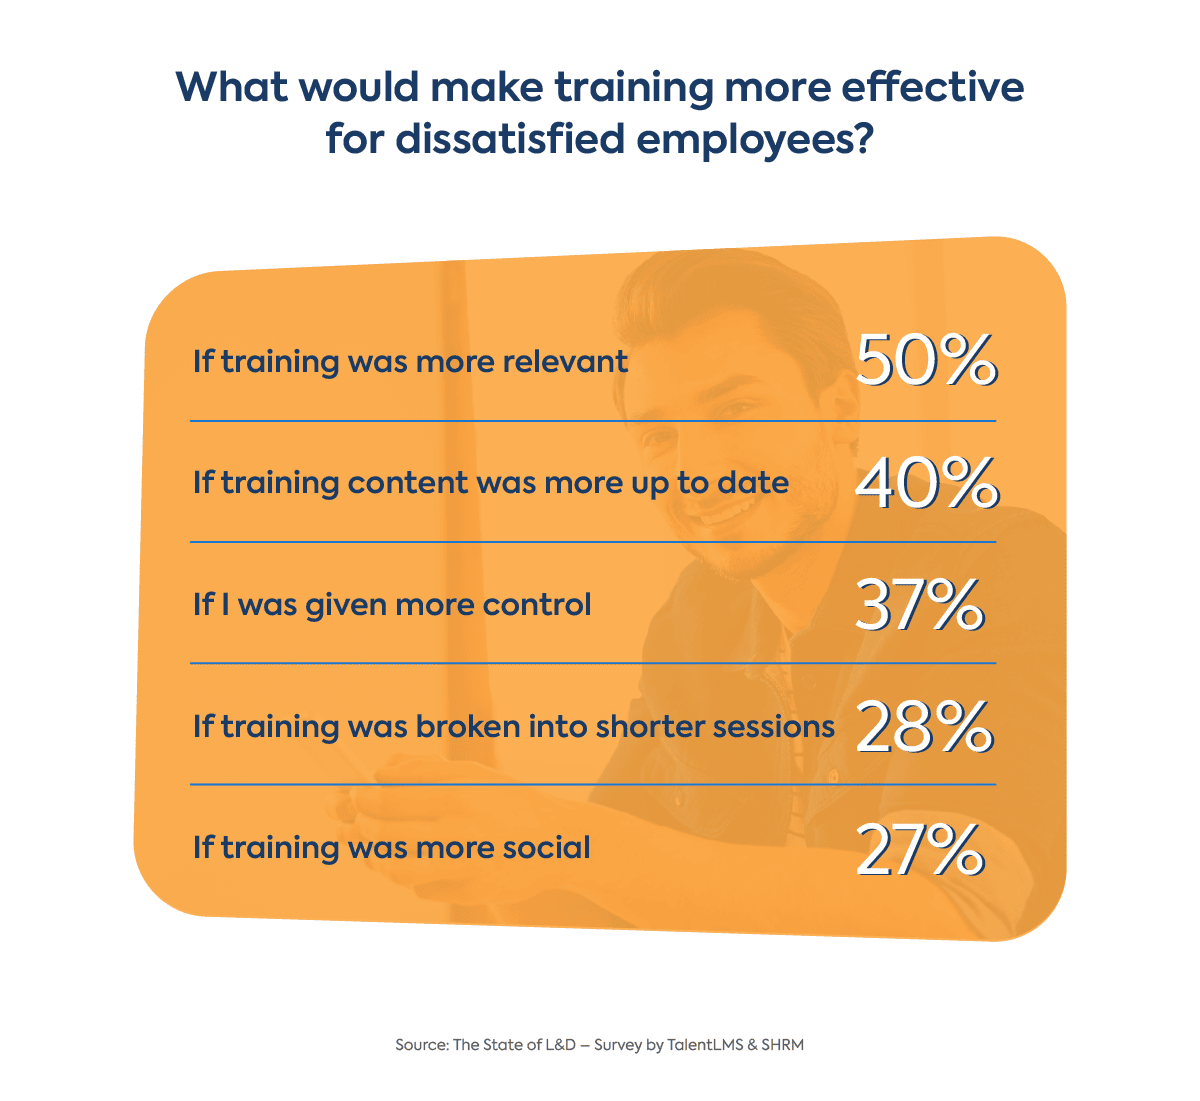 Learning and development: How to improve employee training